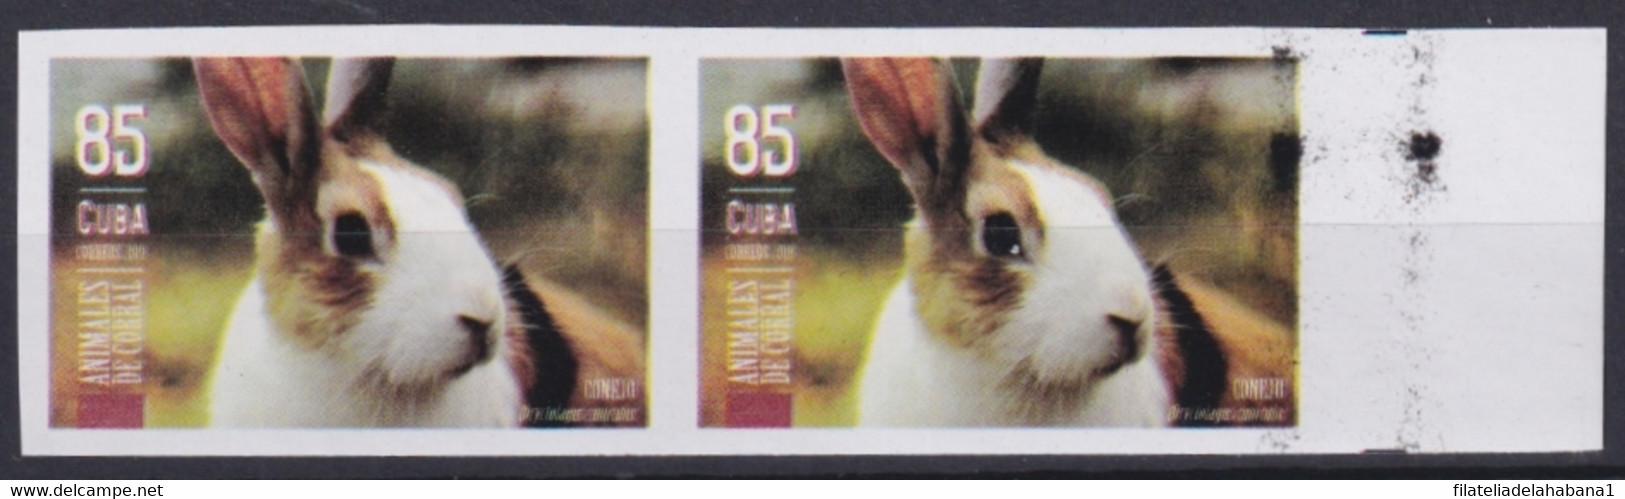 2019.192 CUBA MNH 2019 IMPERFORATED PROOF 90c ANIMALES DE CORRAL RABBIT CONEJO. - Imperforates, Proofs & Errors